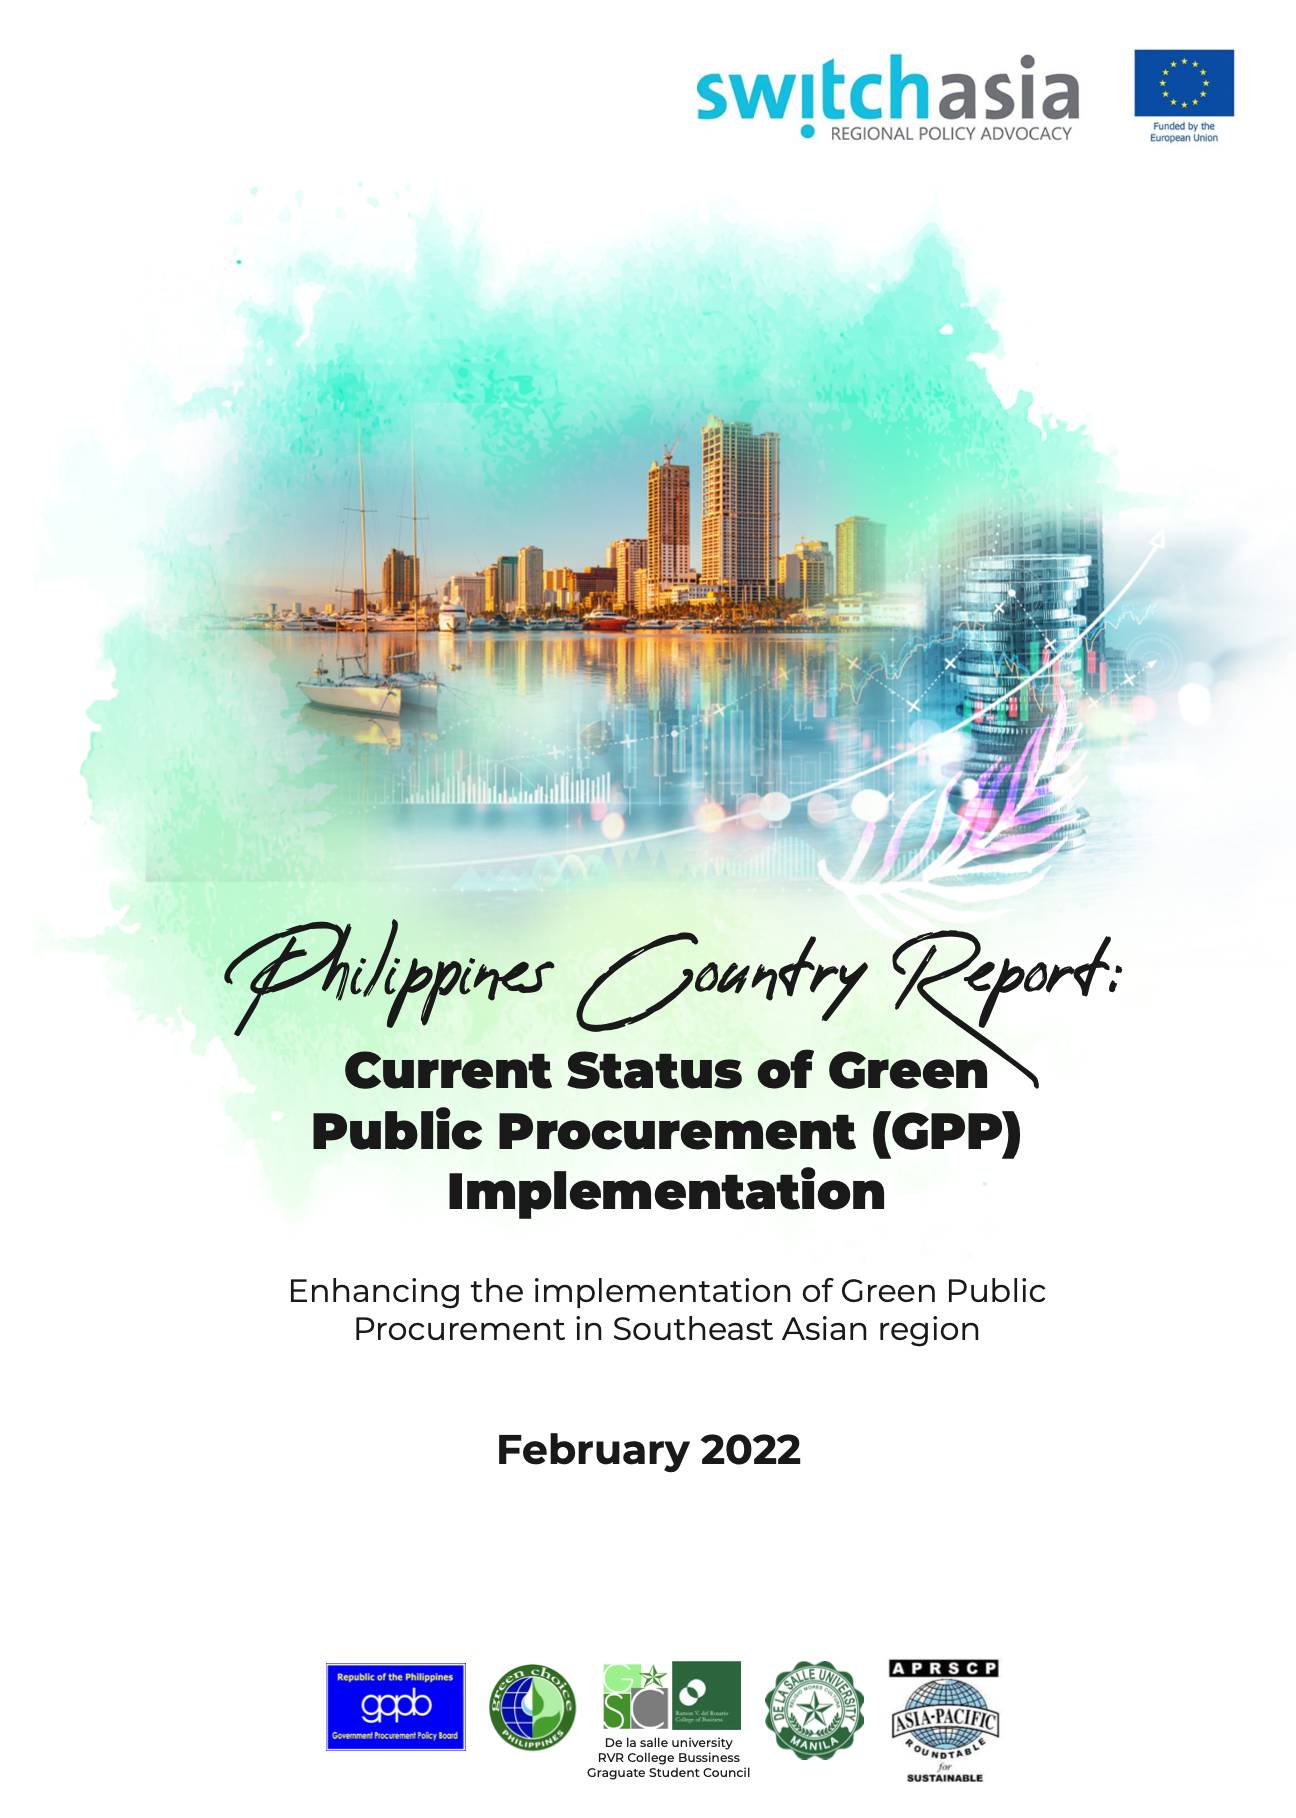 Philippines Country Report: Current Status of Green Public Procurement Implementation